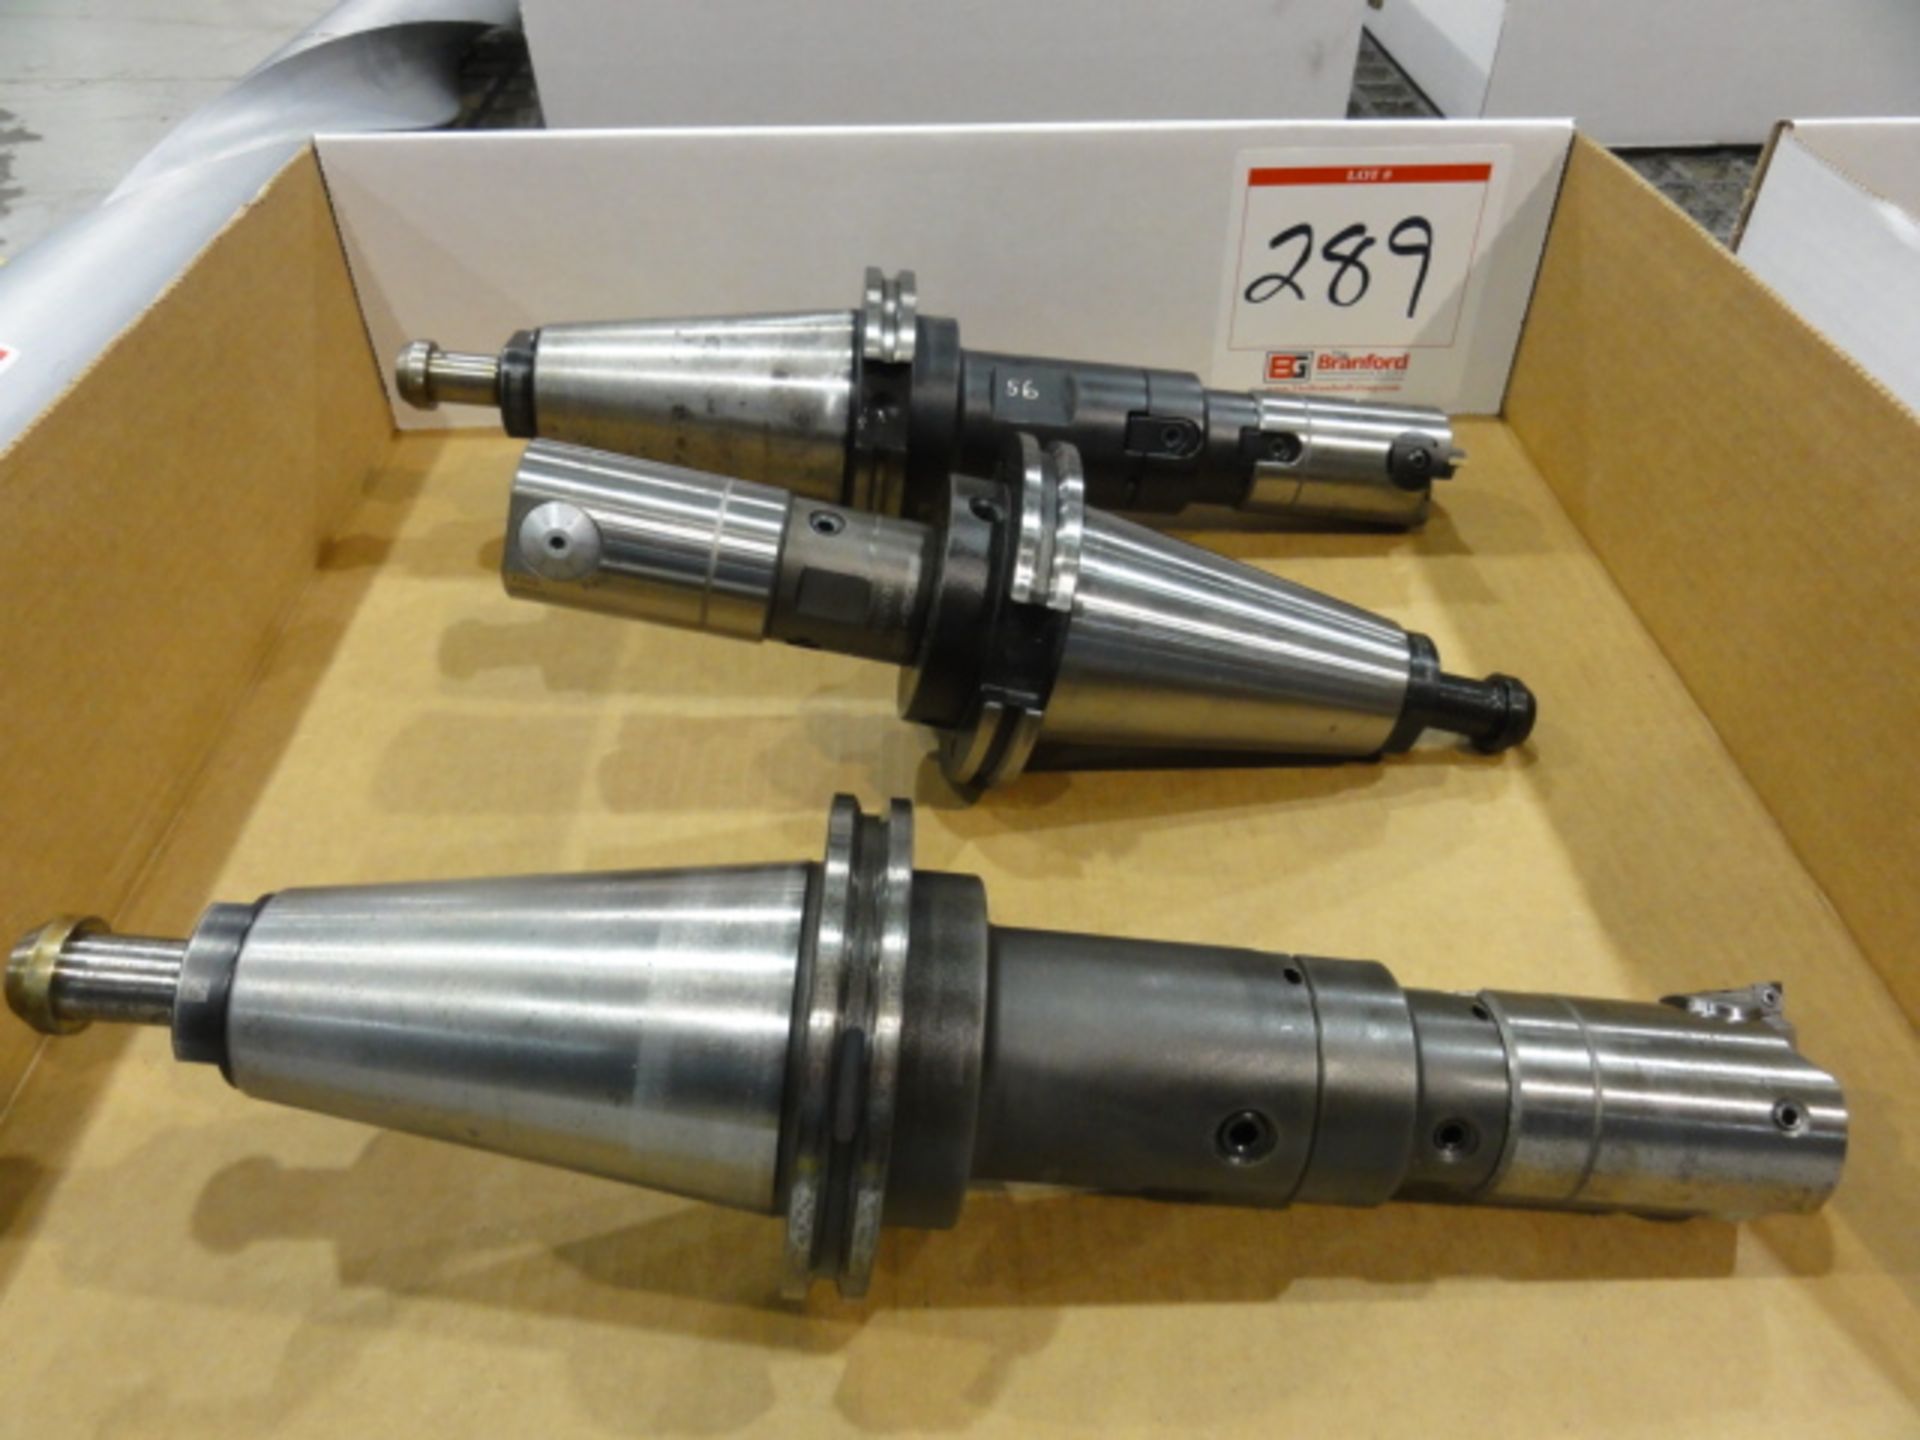 Lot of (3) CAT 50 Tool Holders w/ Seco Model 78040 Carbide Insert Micro Balancing Boring Heads - Image 2 of 2